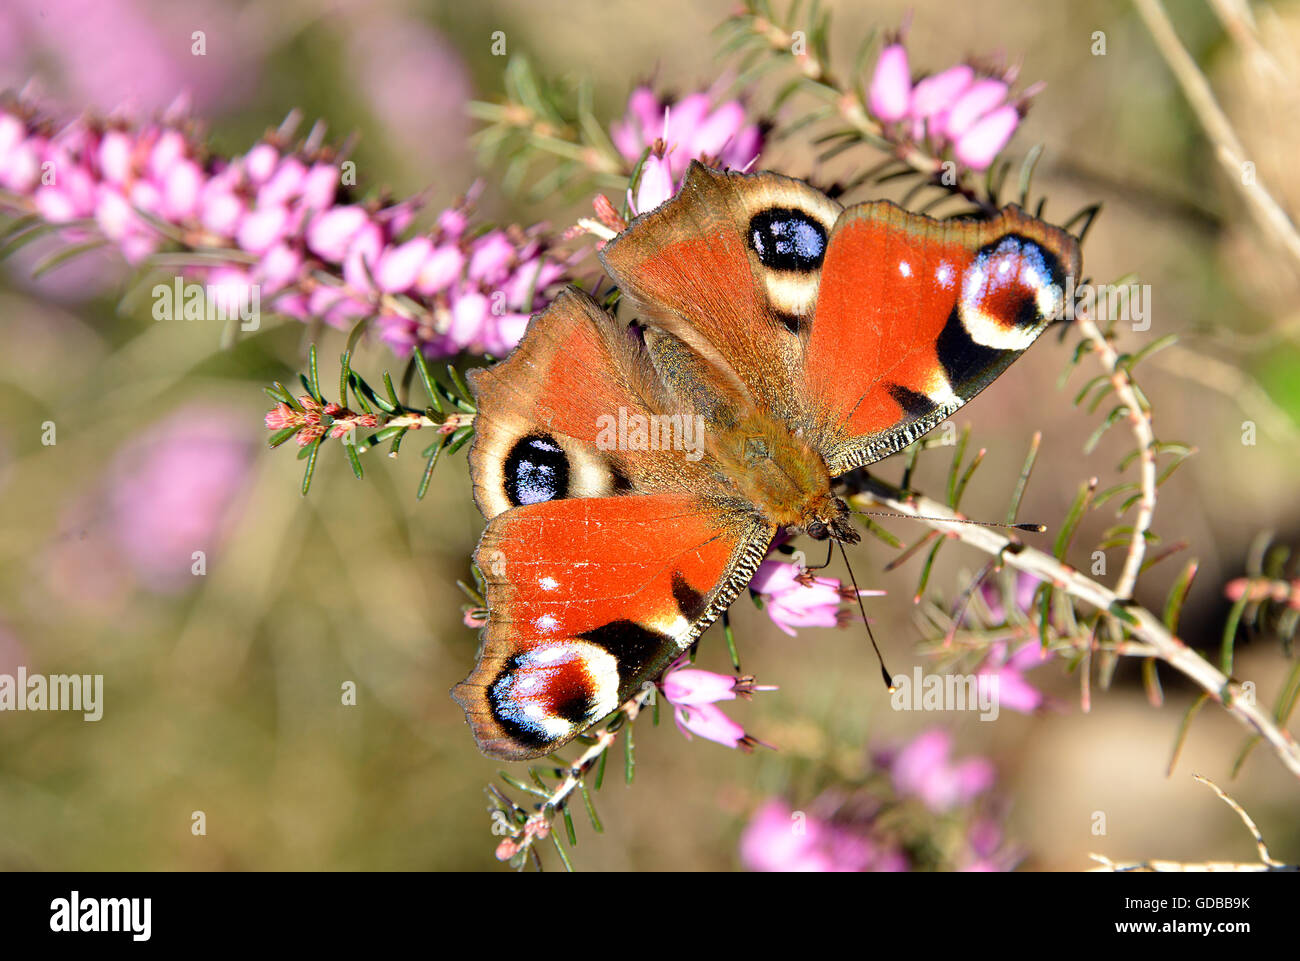 European Peacock butterfly (Inachis io) eating on heather flower seen from above Stock Photo